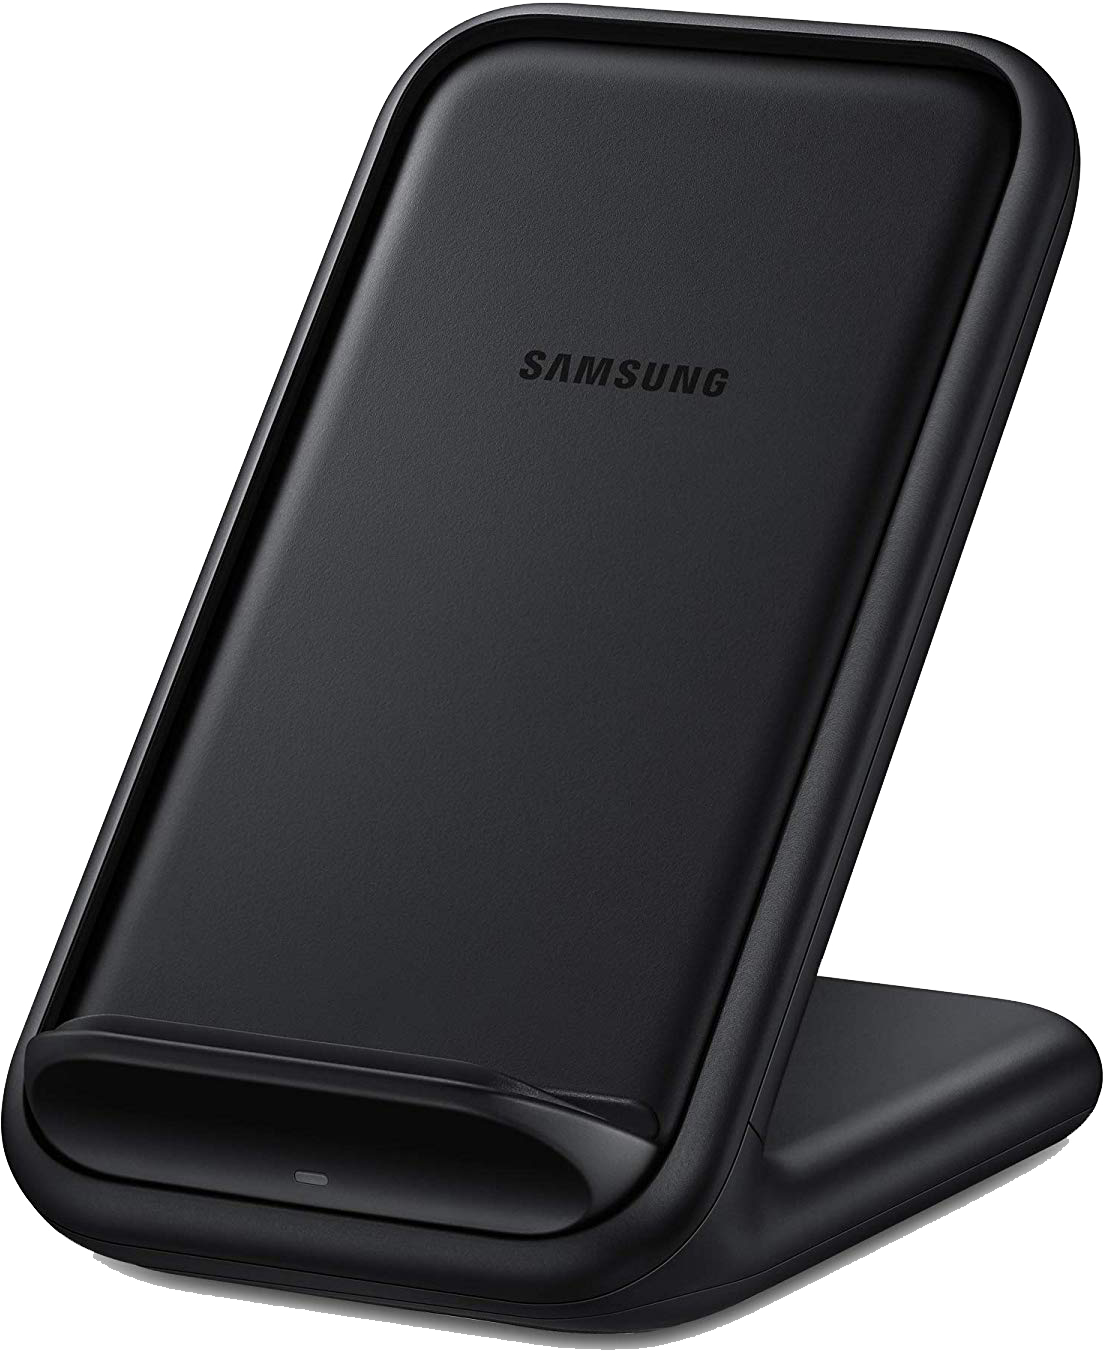 Samsung 15W Fast Charge 2.0 Wireless Charging Stand